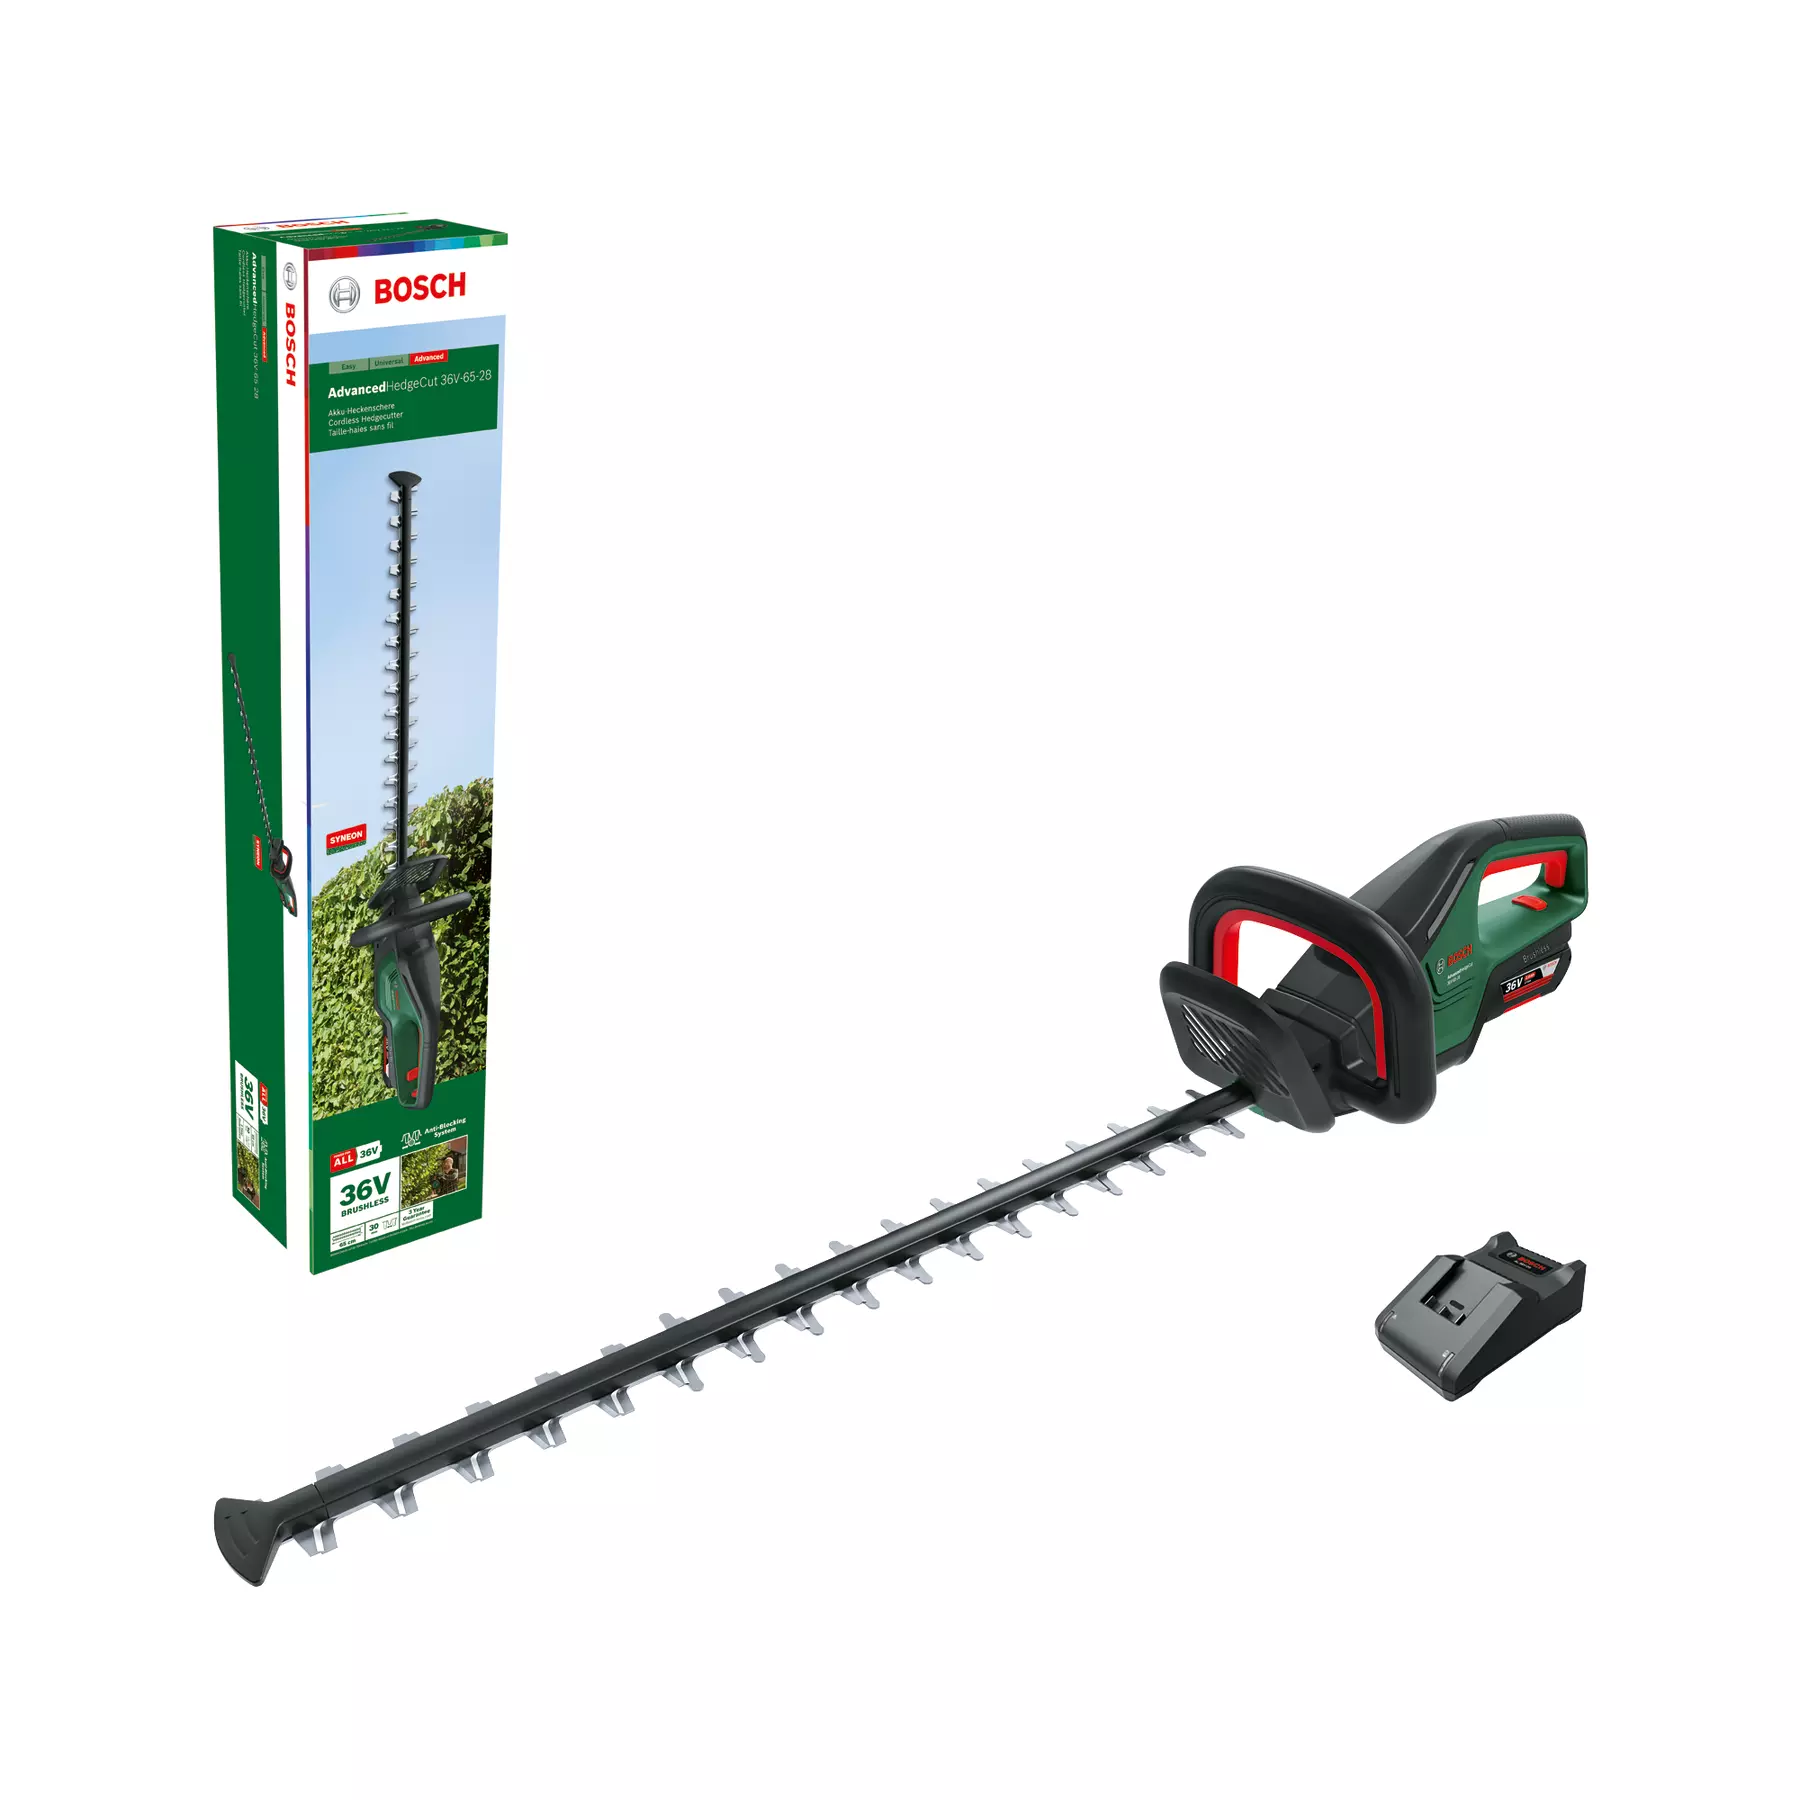 Bosch 6528 Advanced Hedgecut -36V With